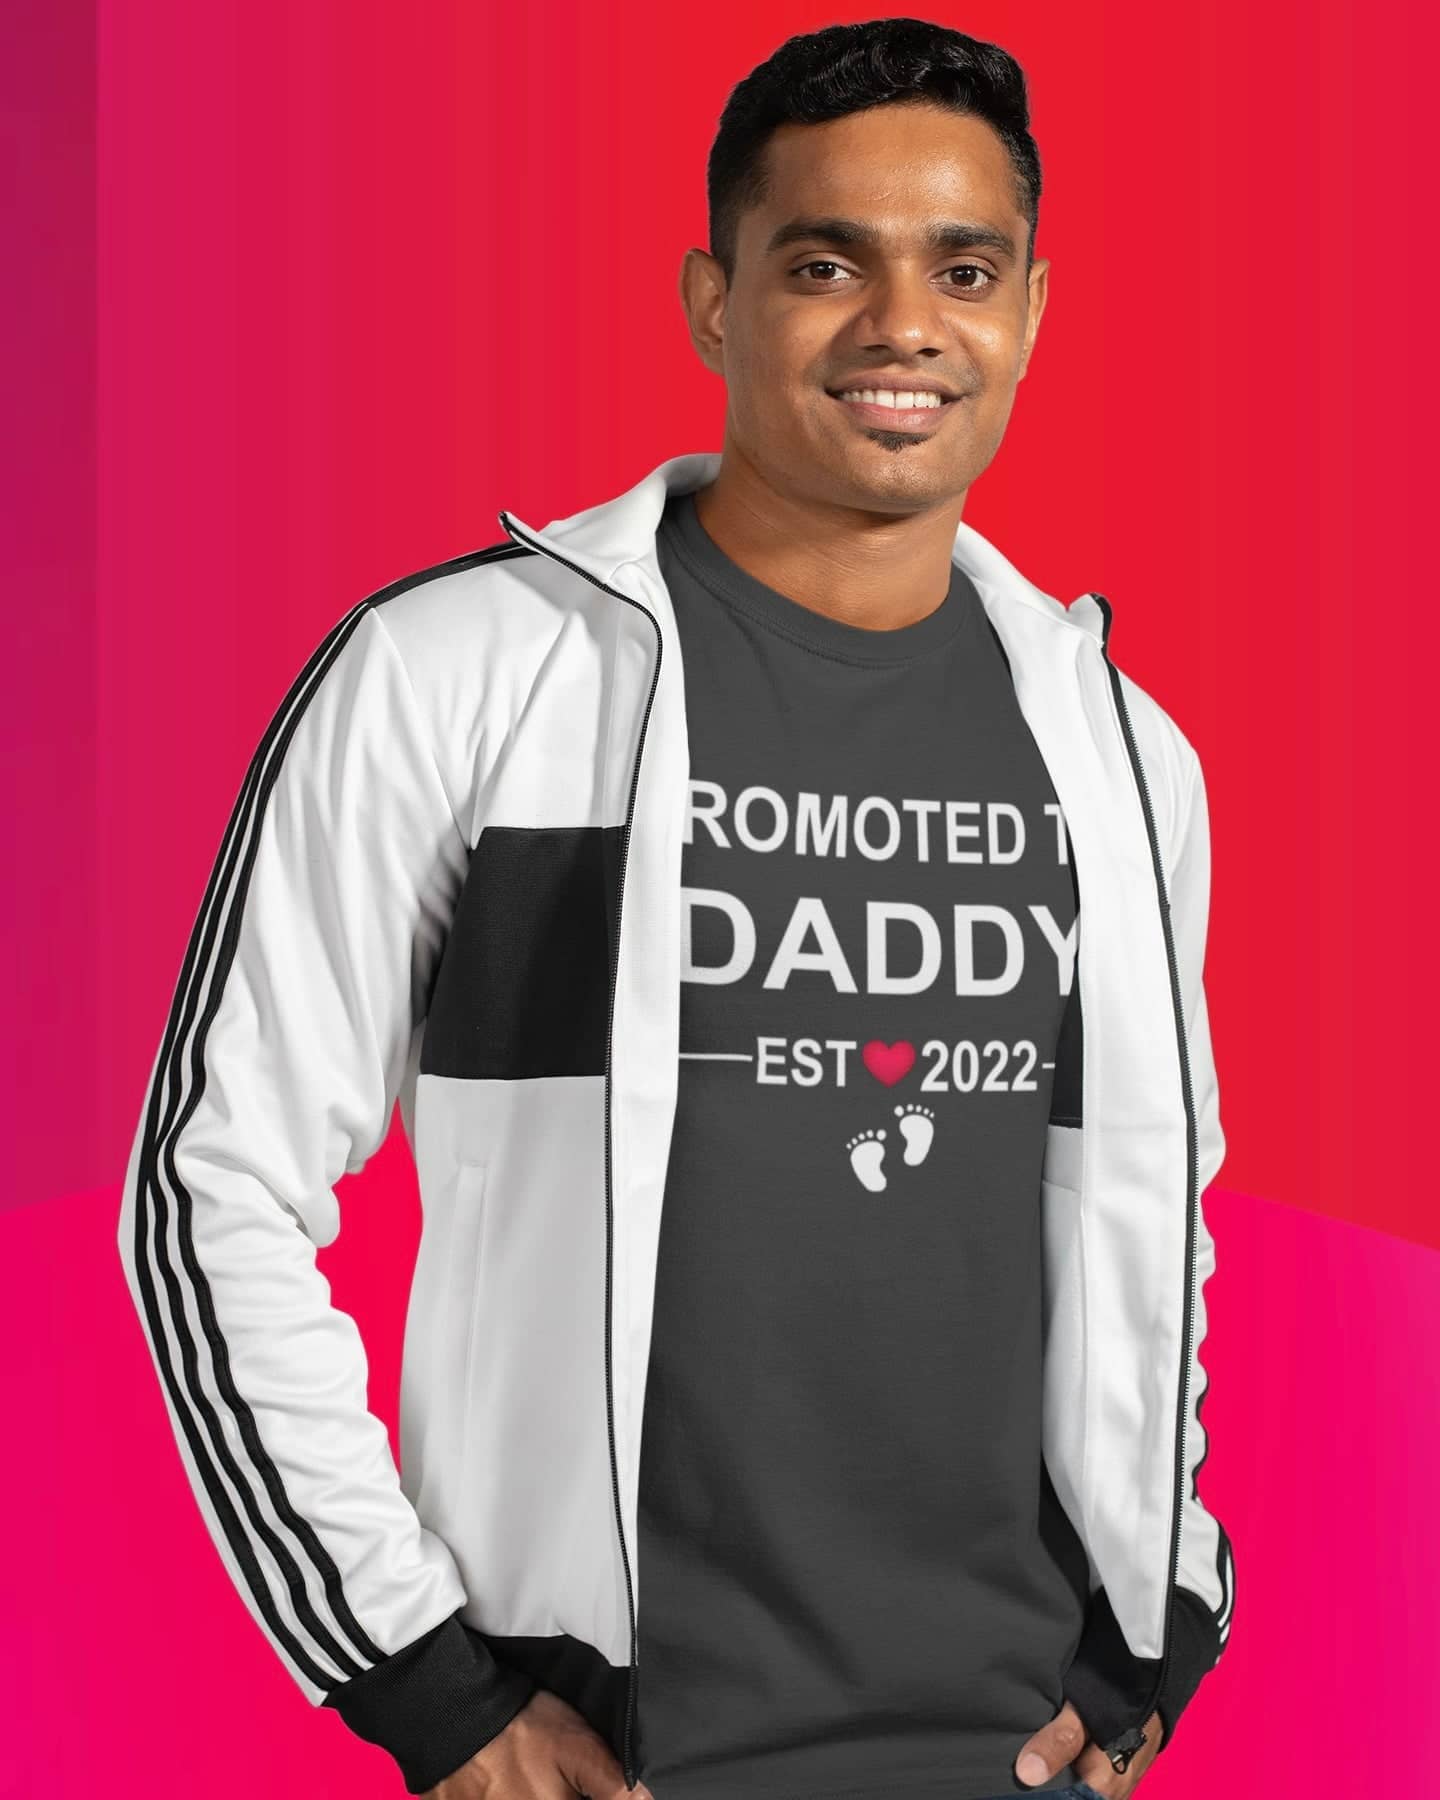 Promoted to Daddy Est. 2022 Exclusive T Shirt for Men freeshipping - Catch My Drift India